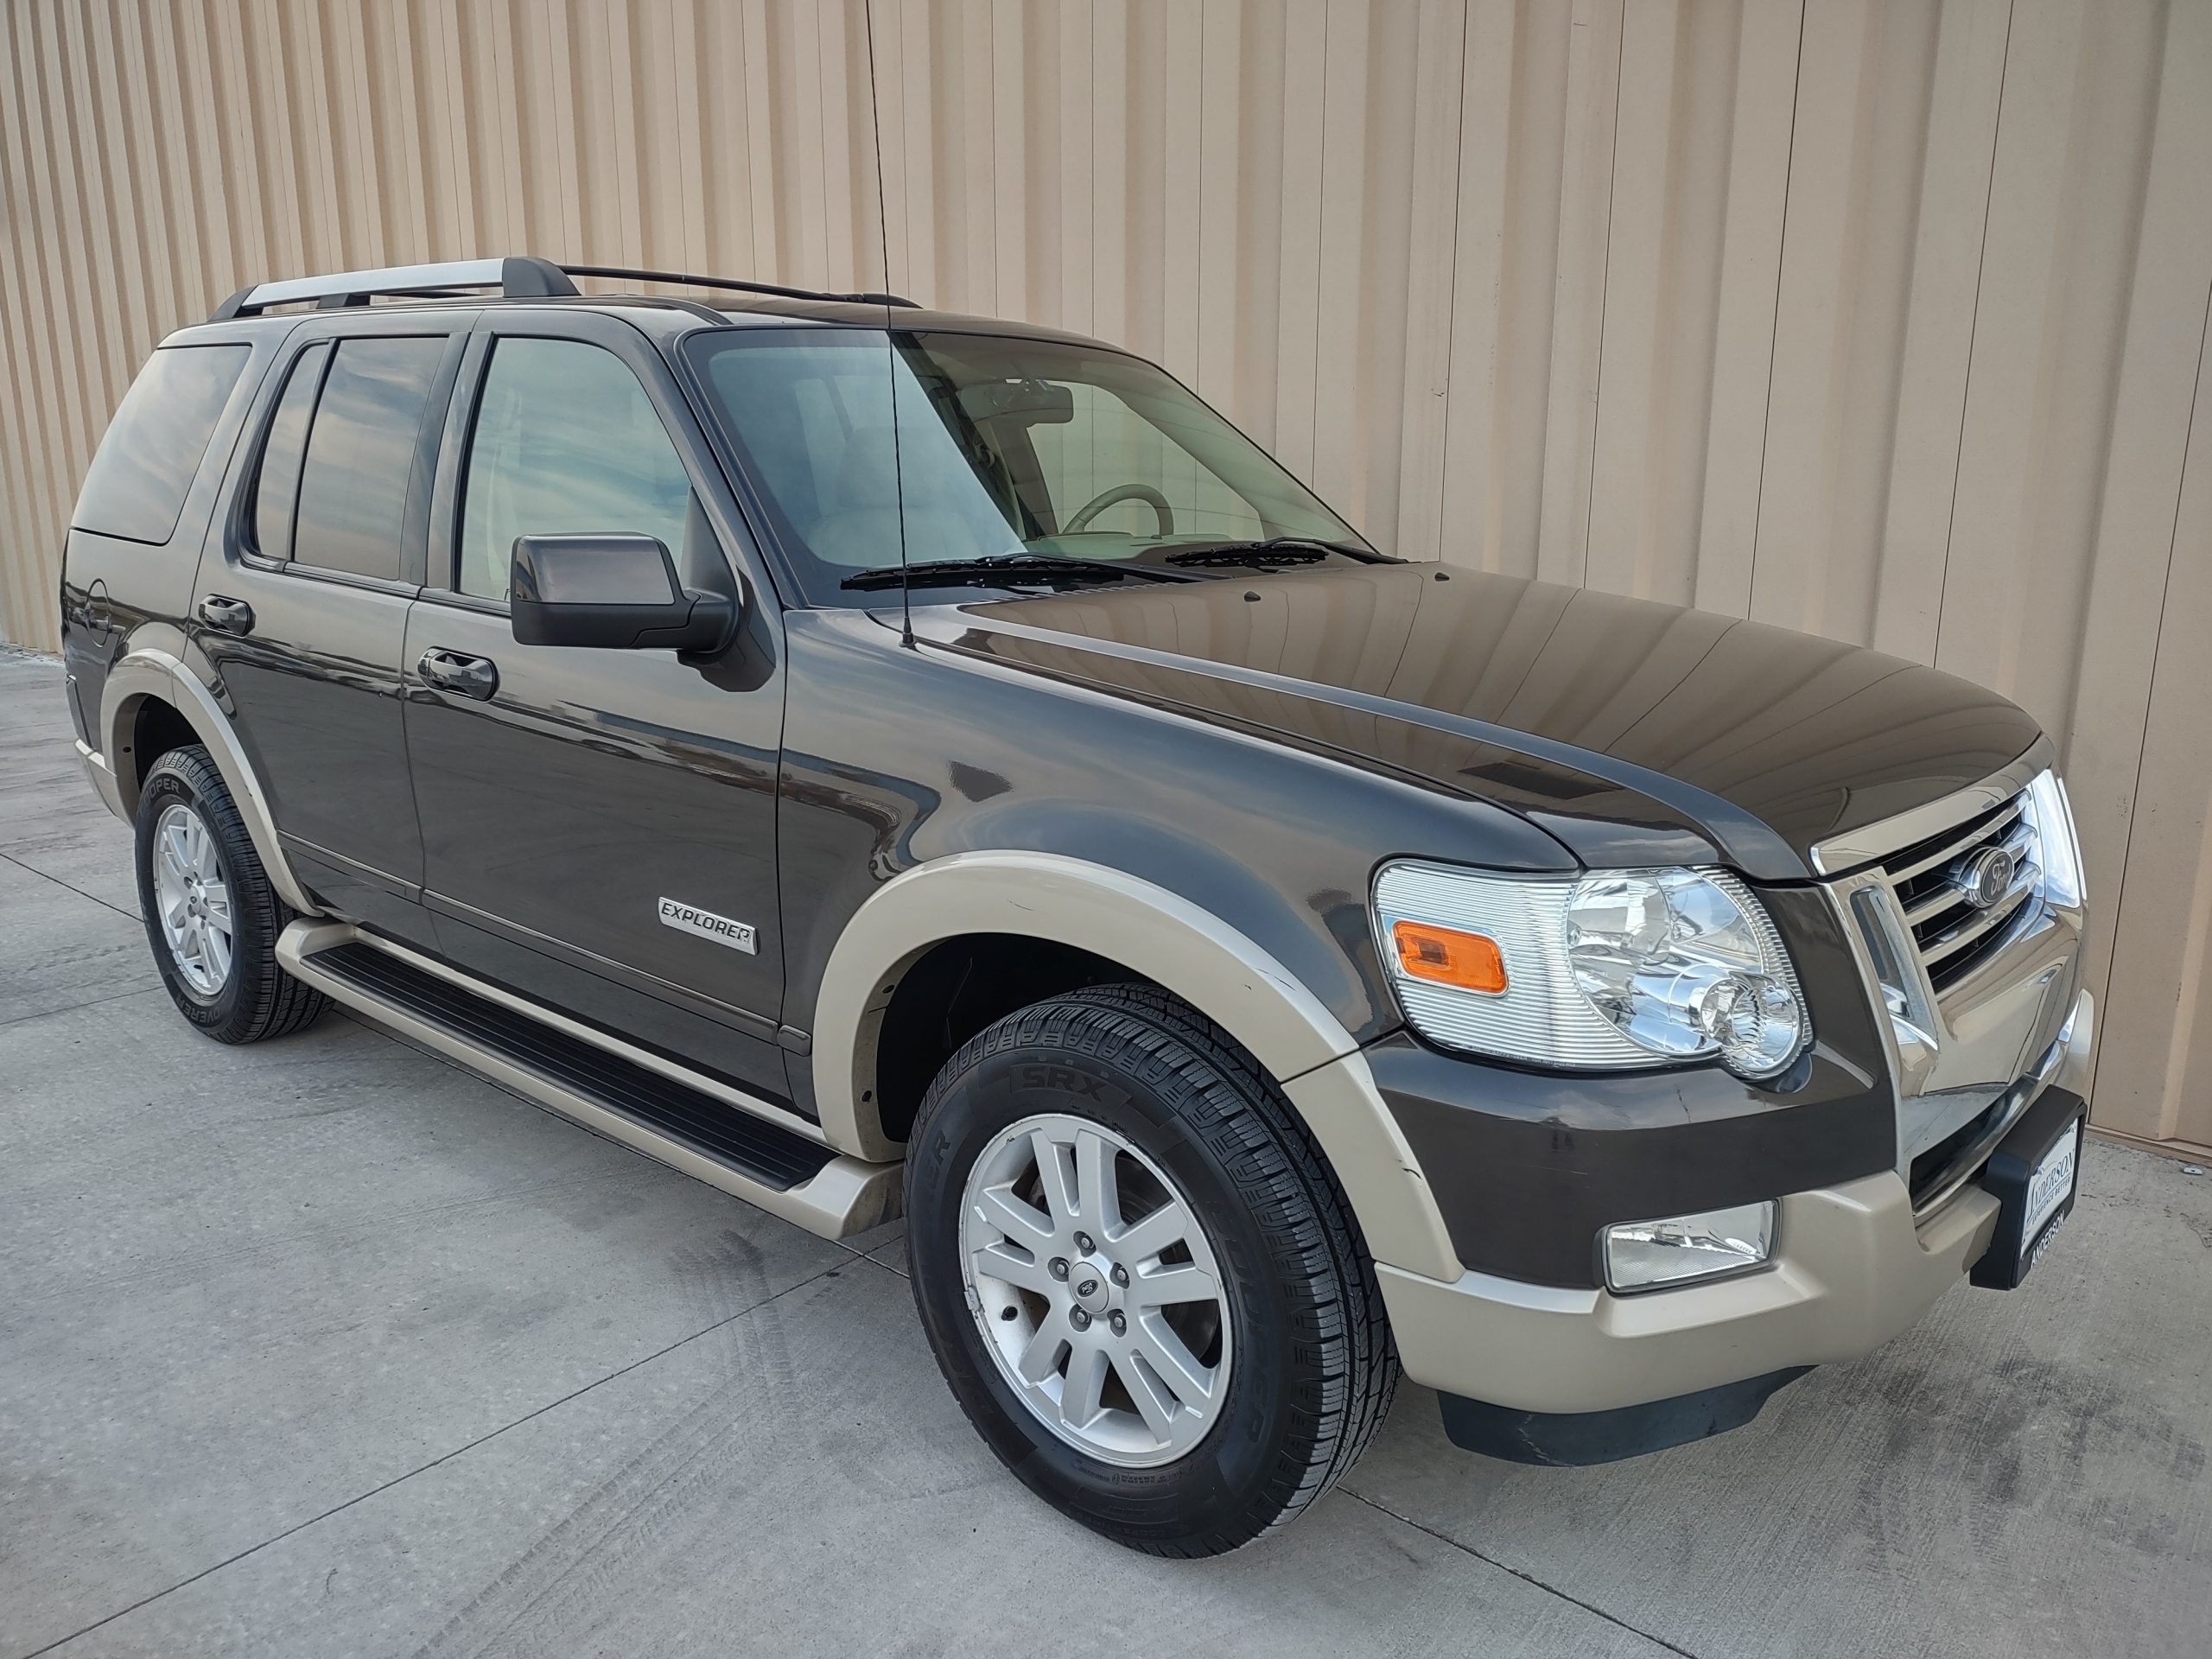 Used 2007 Ford Explorer Eddie Bauer SUV for sale in 